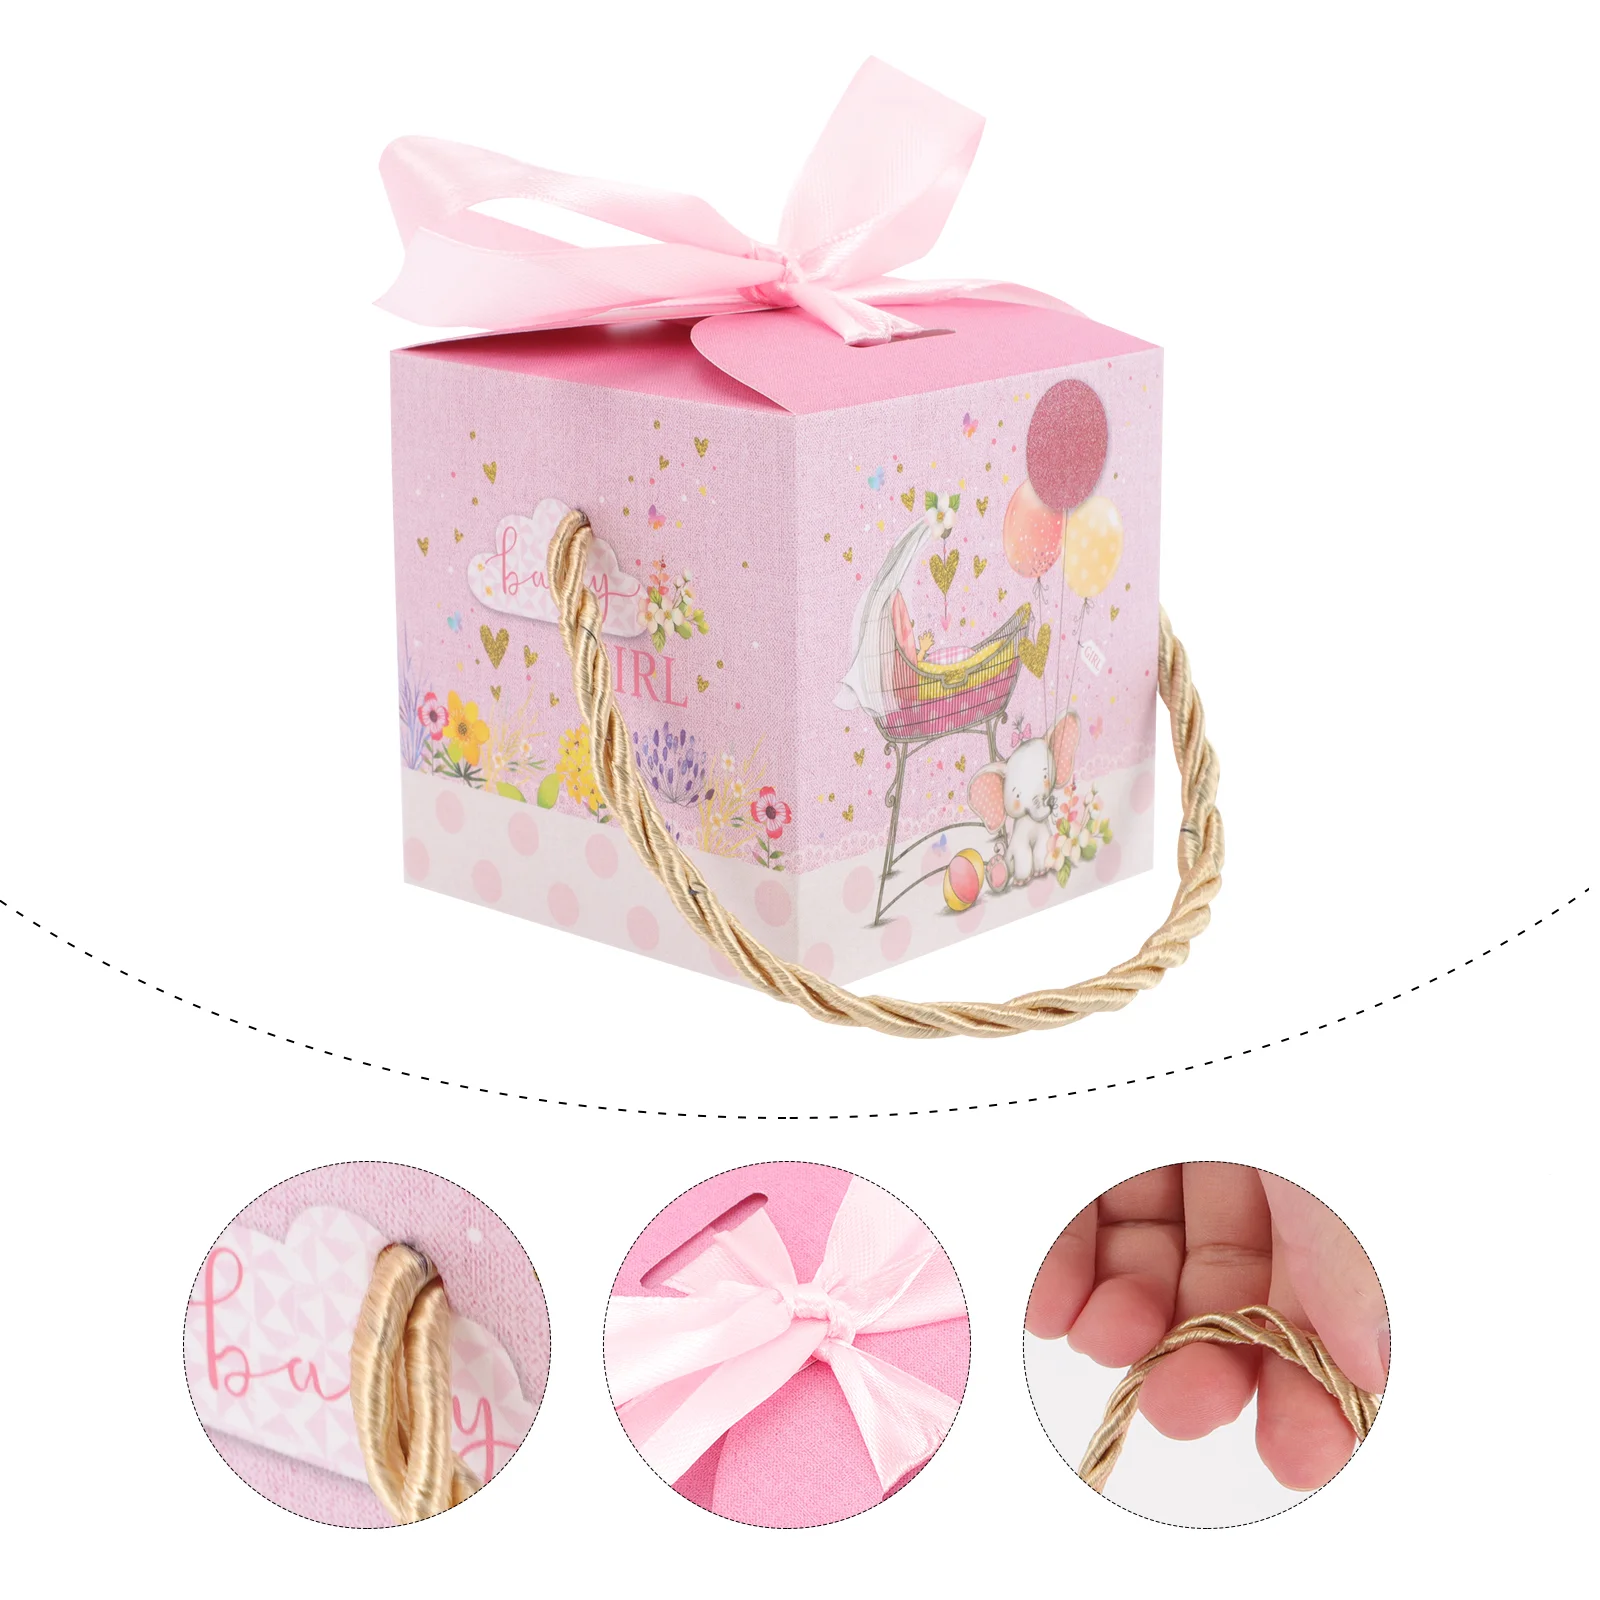 

20 Pcs Baby Shower Favors Boys Cookies Gift Box Present Box Candy Containers Candy Hand Gift Box Biscuit Wedding Favors Boxes